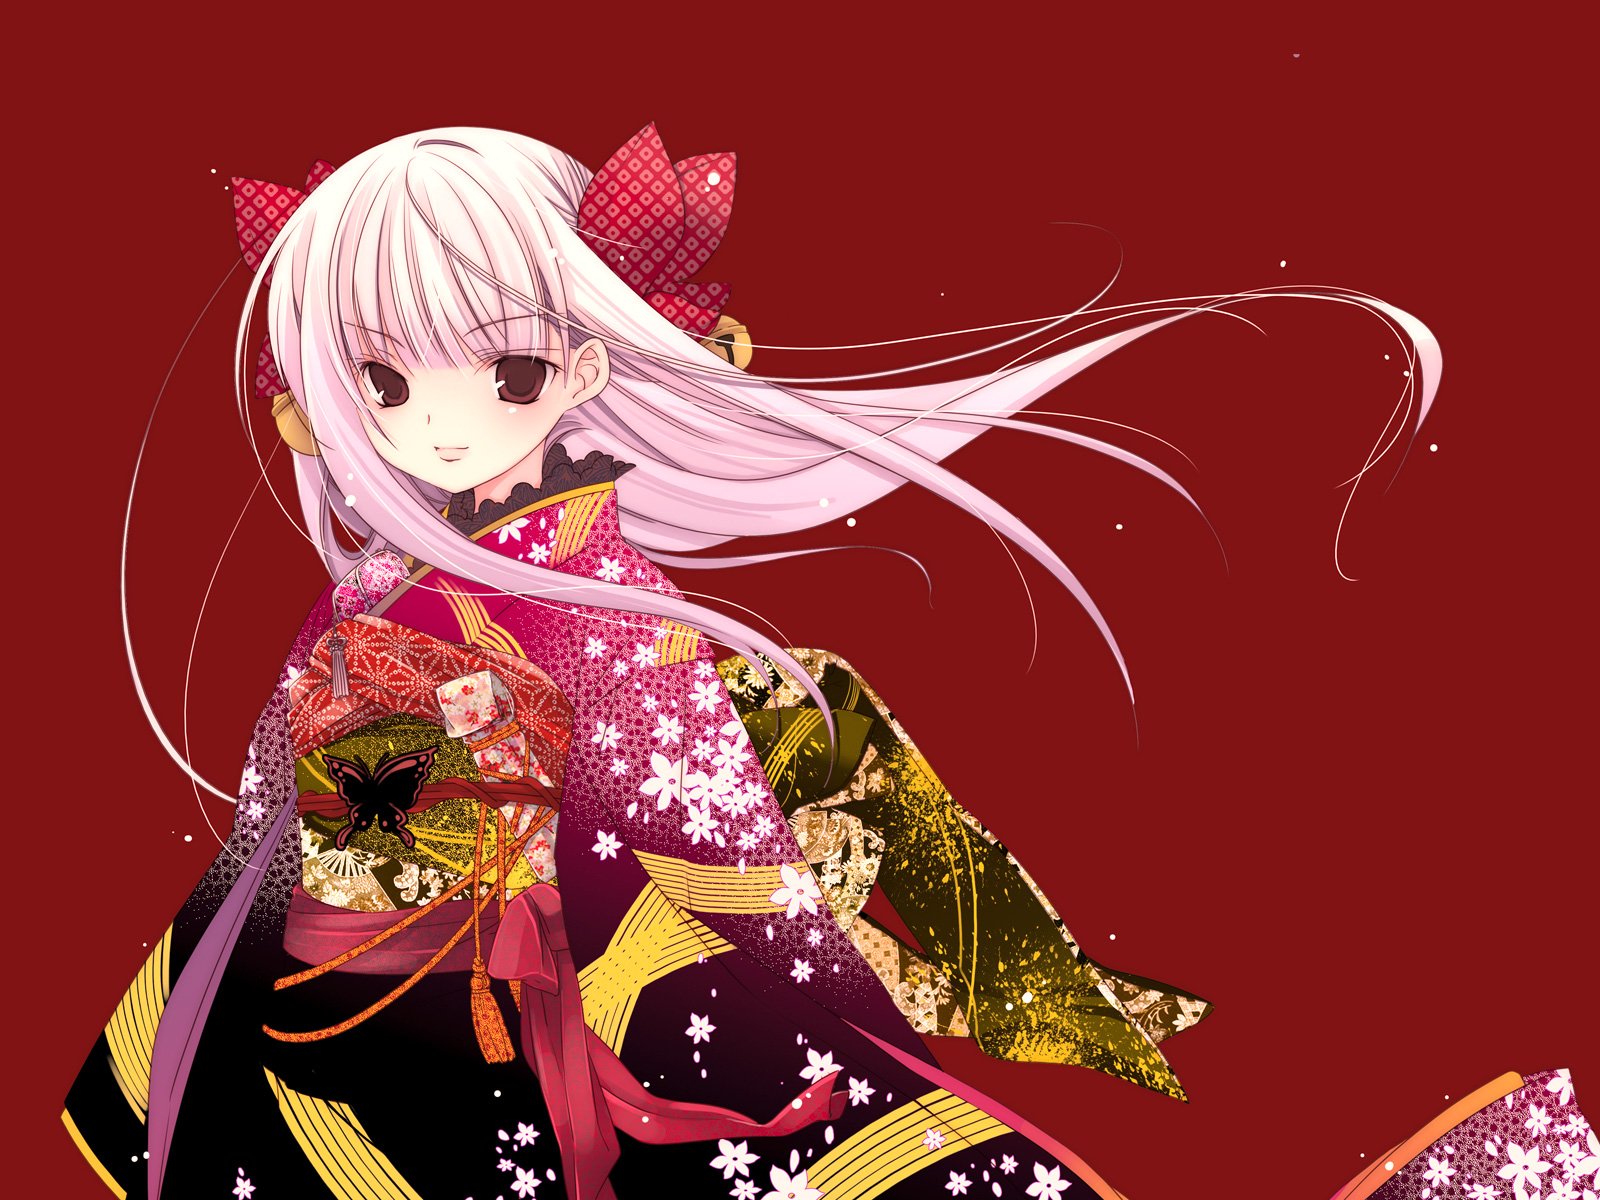 dress, Wind, Long, Hair, Kimono, Red, Eyes, Bows, Bells, White, Hair,  Japanese, Clothes, Simple, Background, Anime, Girls, Red, Background, Hair,  Ornaments, Butterflies, Kirino, Kasumu, Original, Characters Wallpapers HD  / Desktop and Mobile